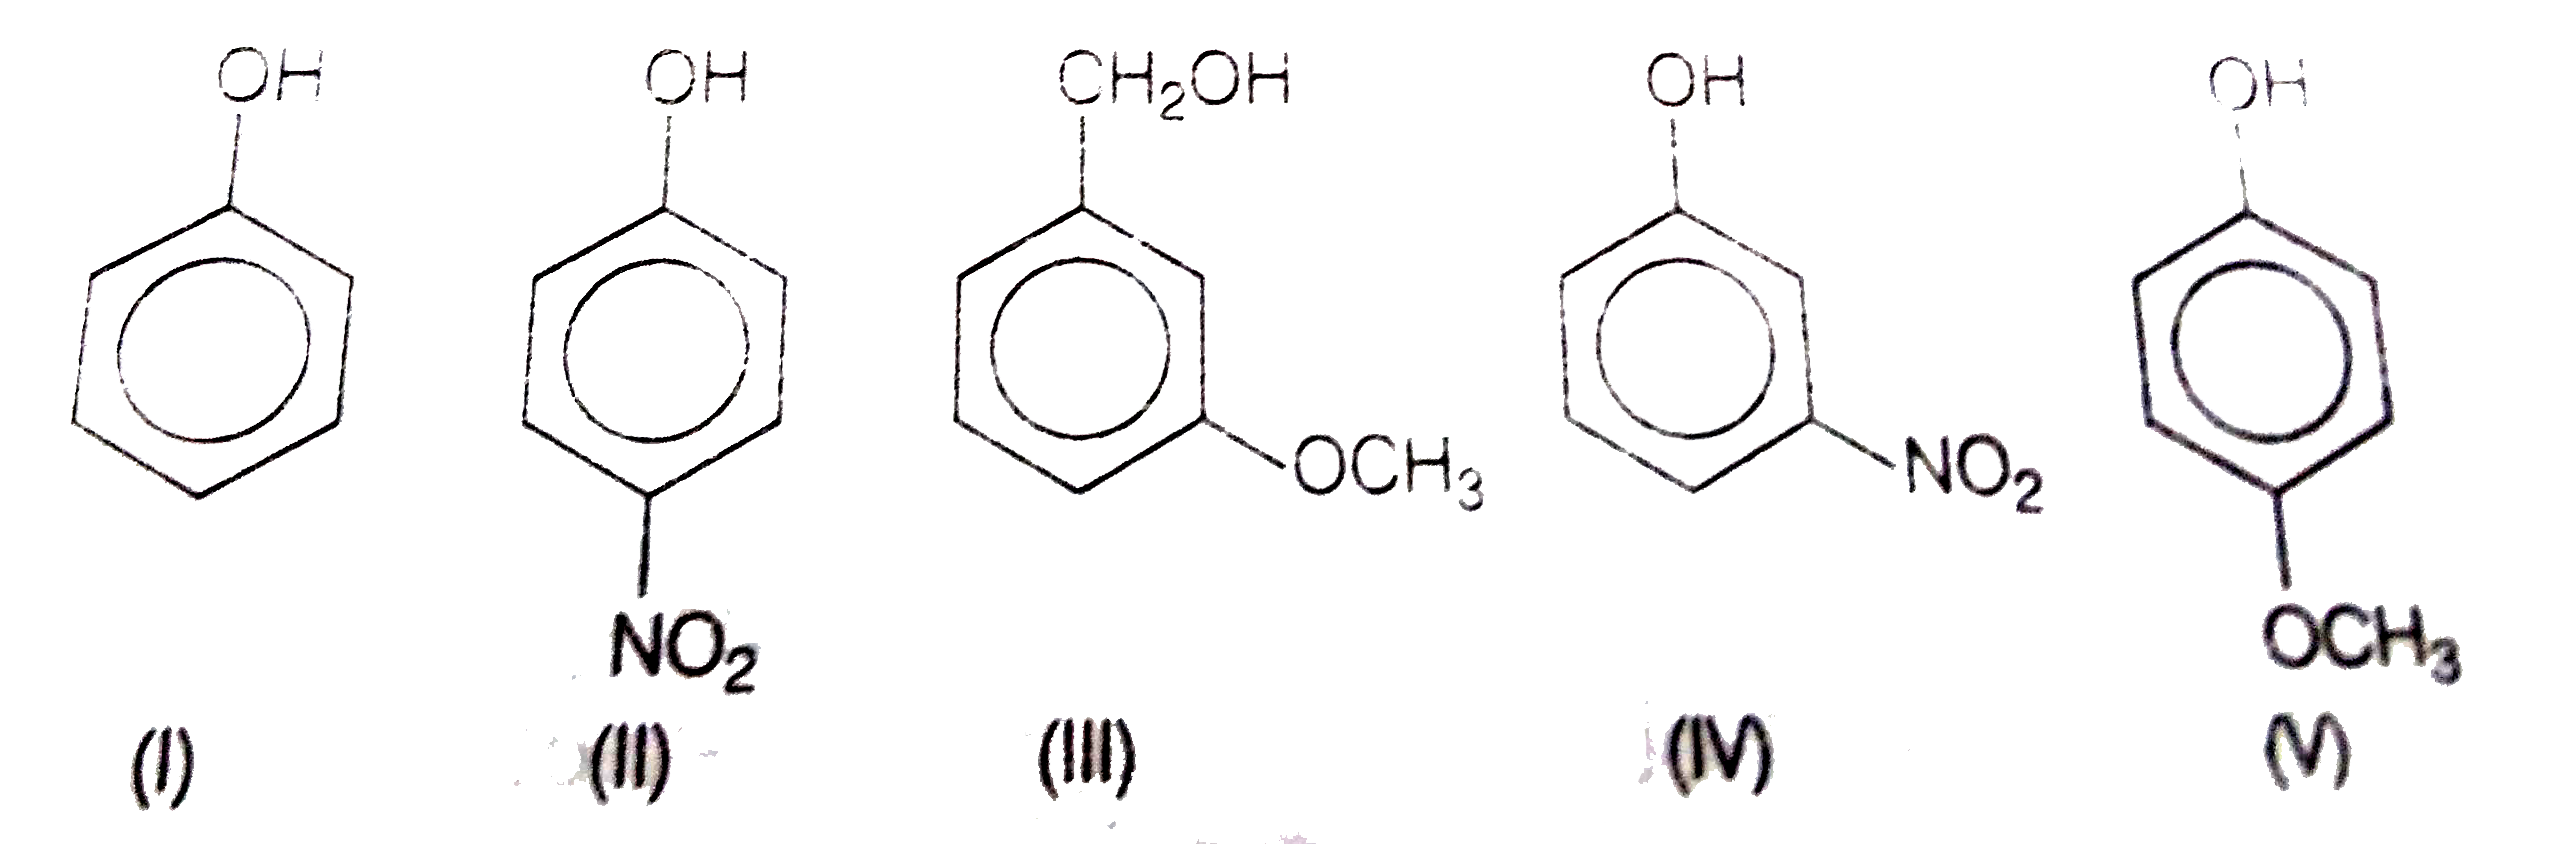 Mark the correct order of decreasing acid strength of the following compounds.